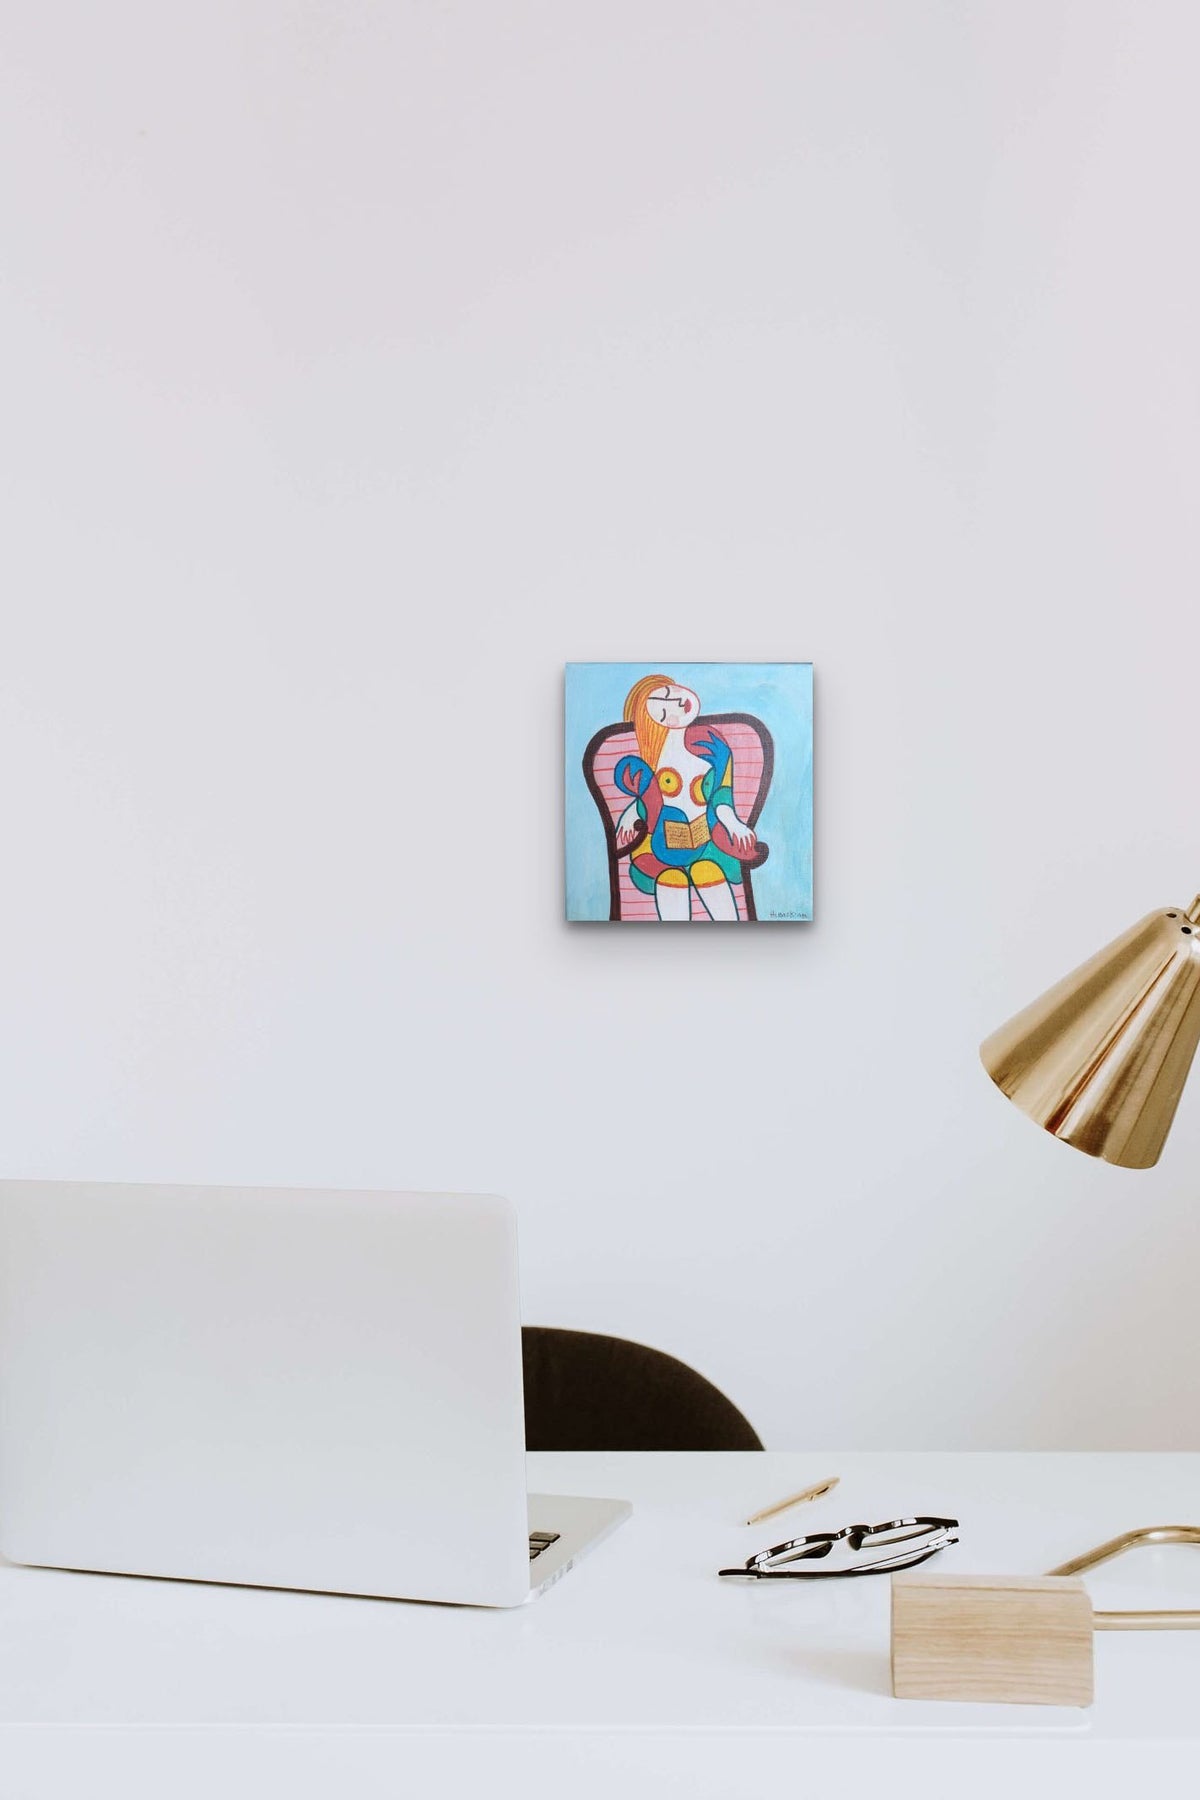 Small Picasso style Figurative Female painting adds bold colors and life to this desk area